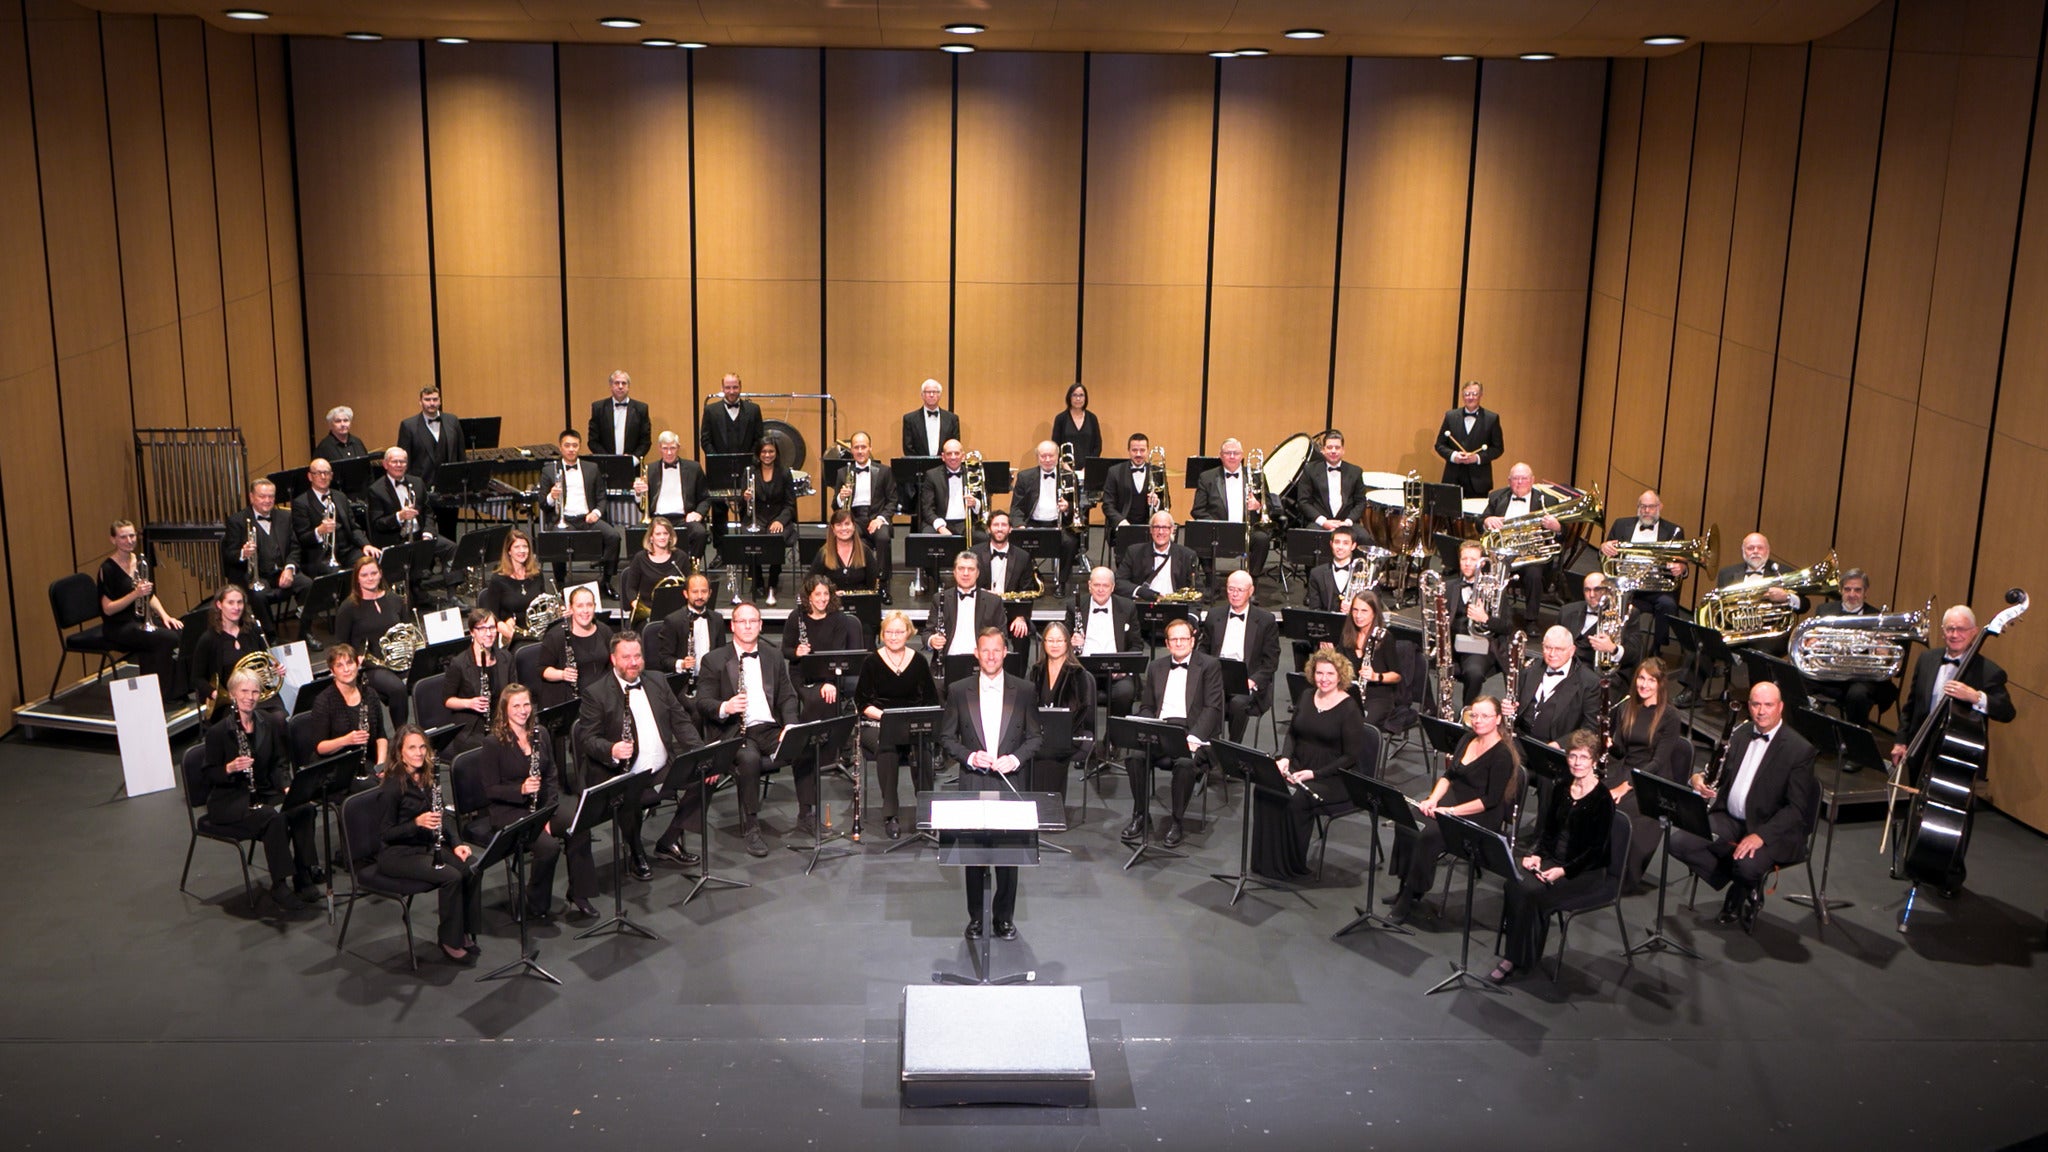 Tacoma Concert Band: Sound The Bells at Pantages Theater